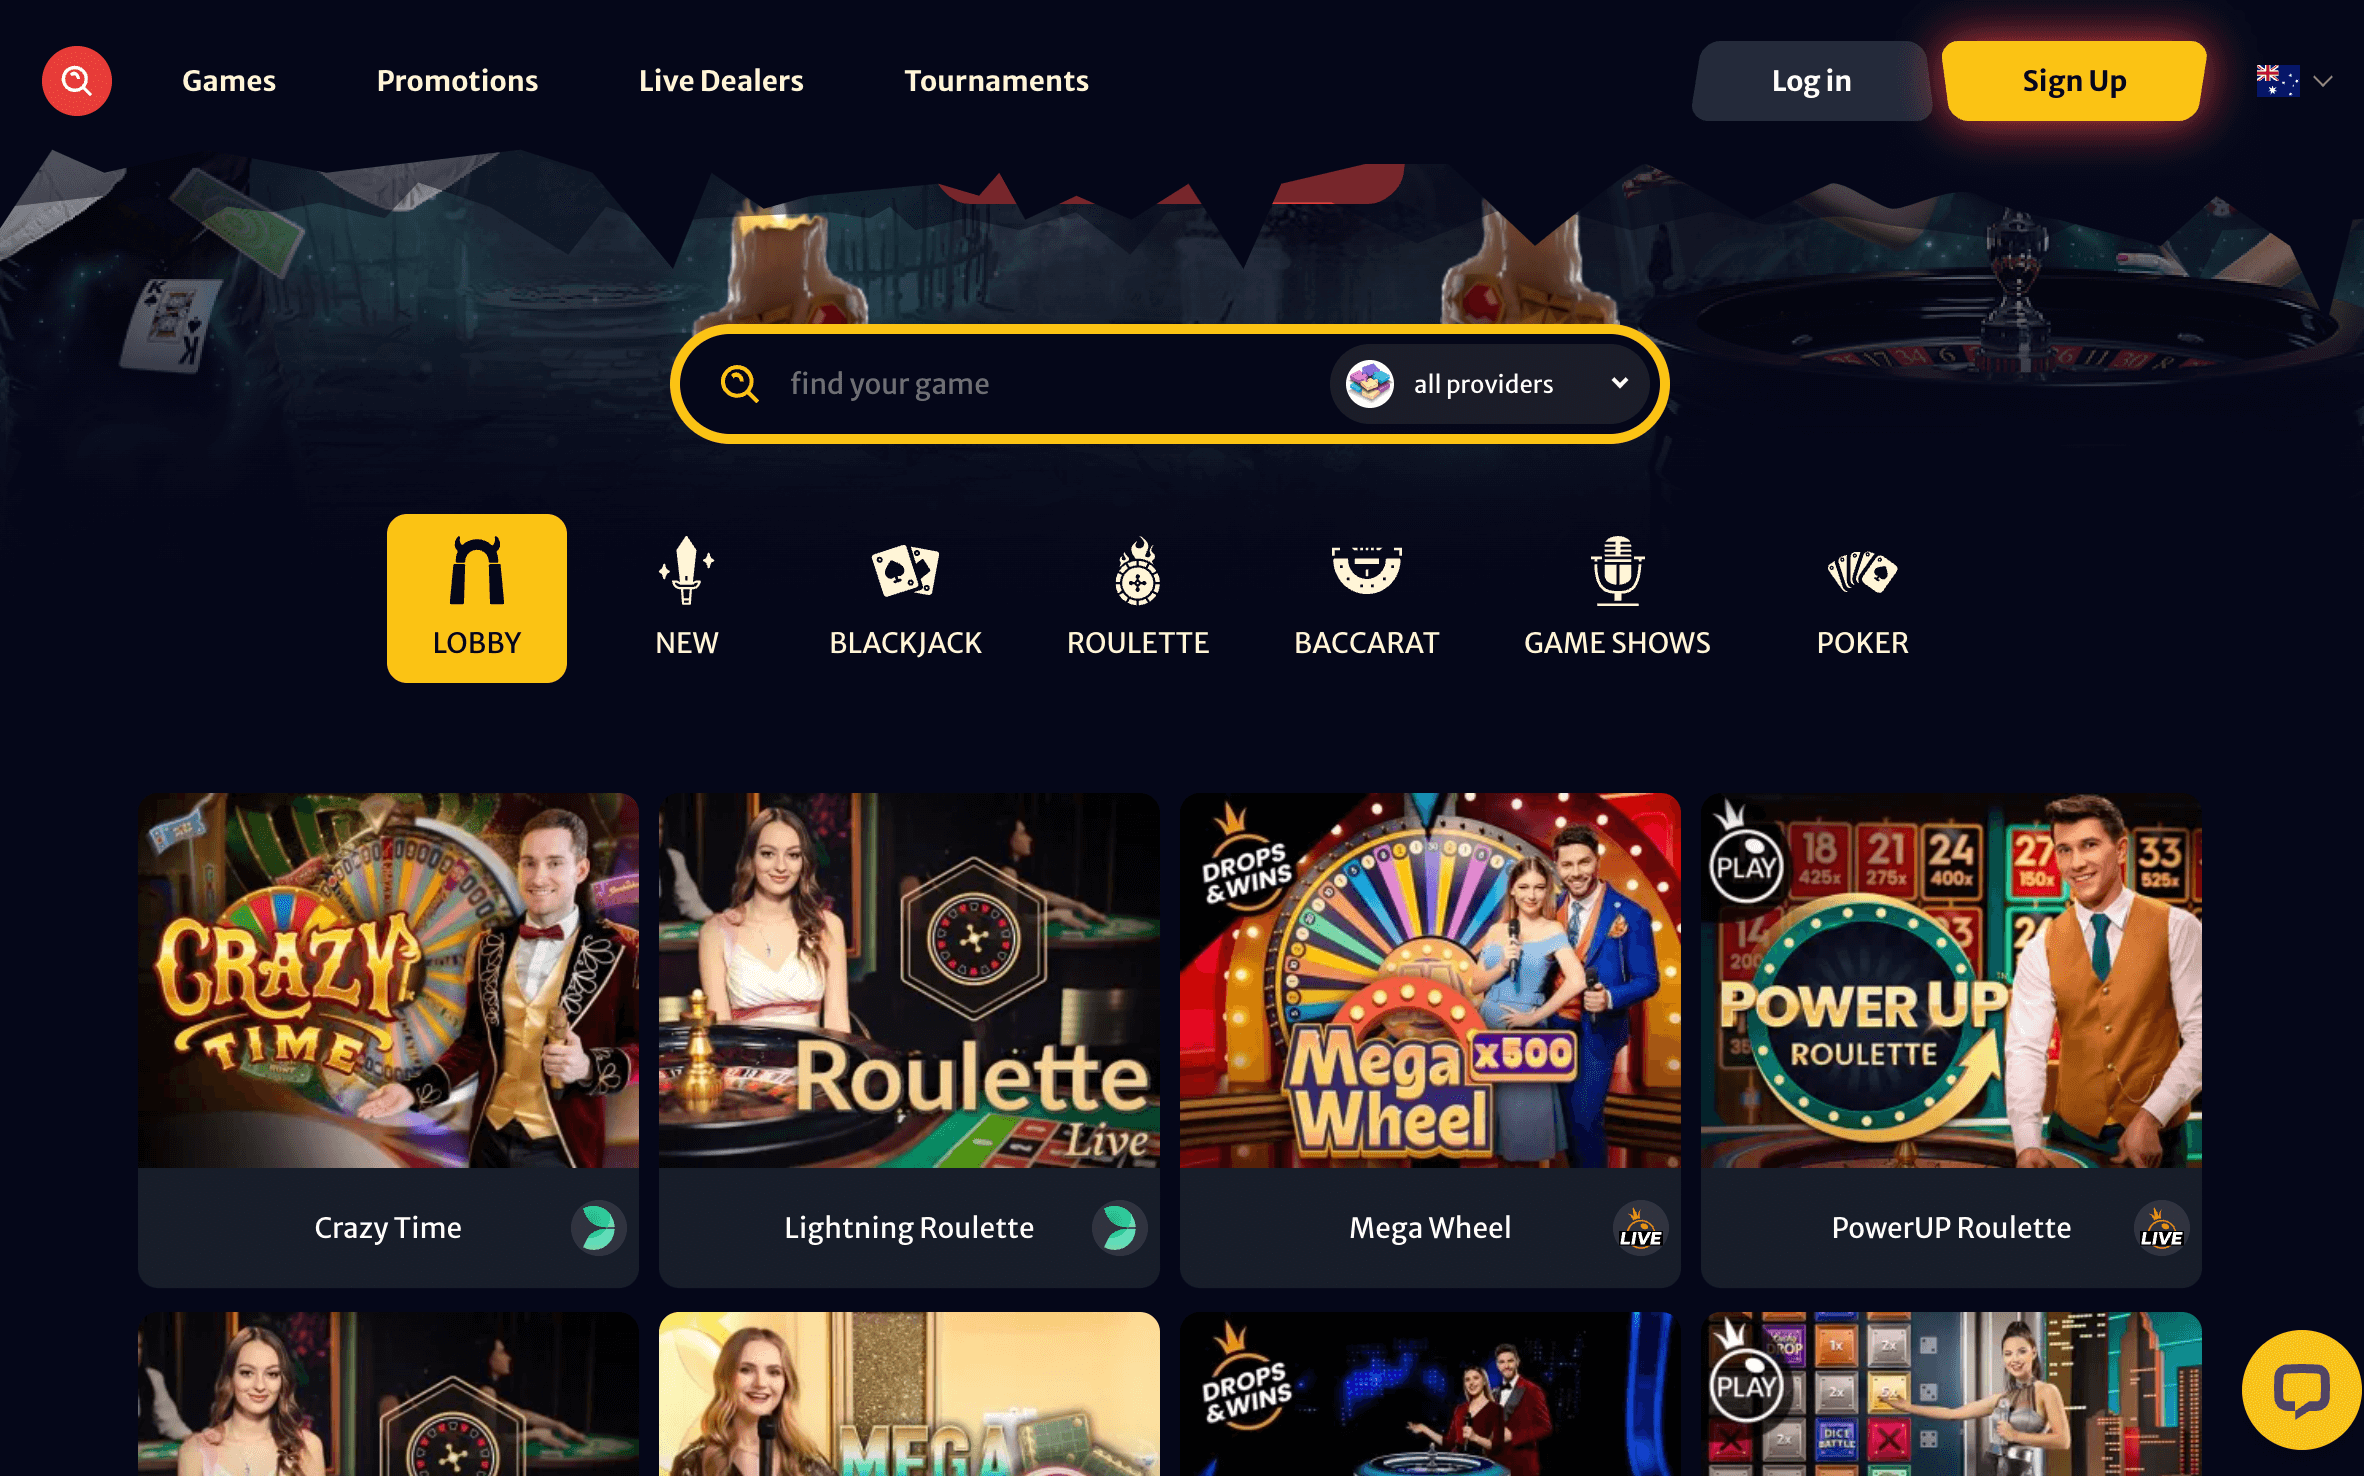 HellSpin Live casino section